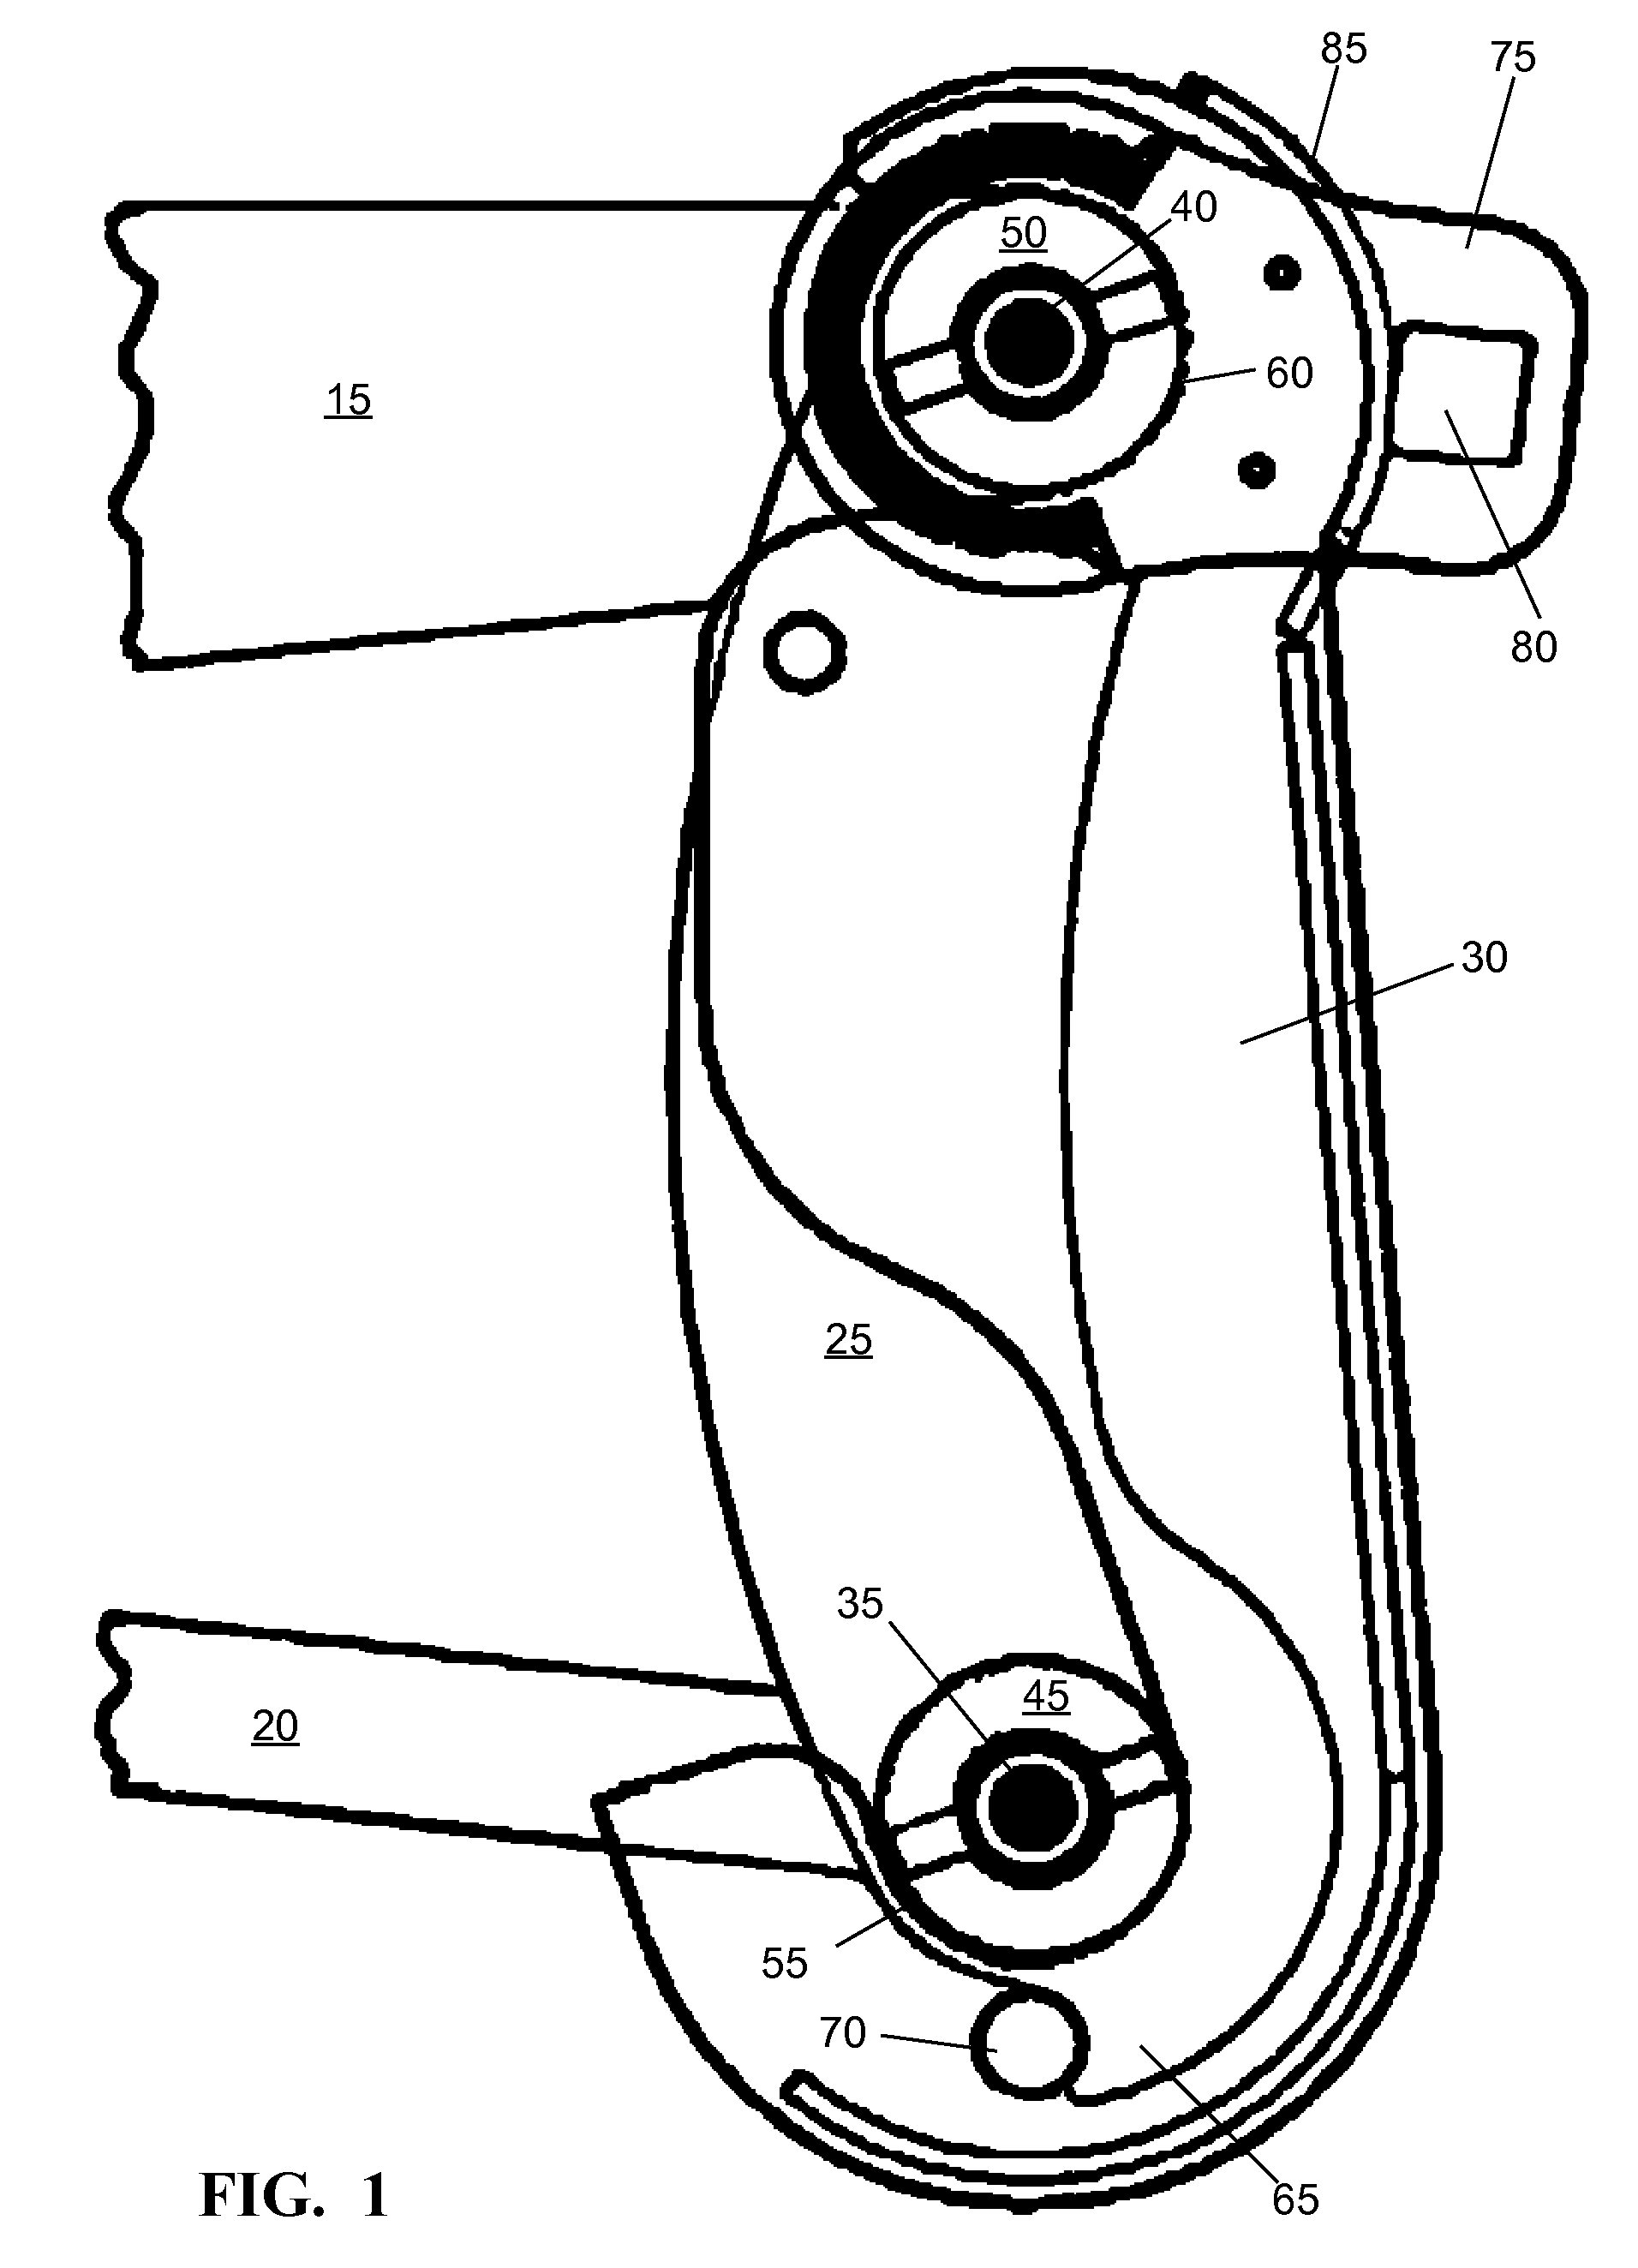 Front end loader attachment and locking mechanism